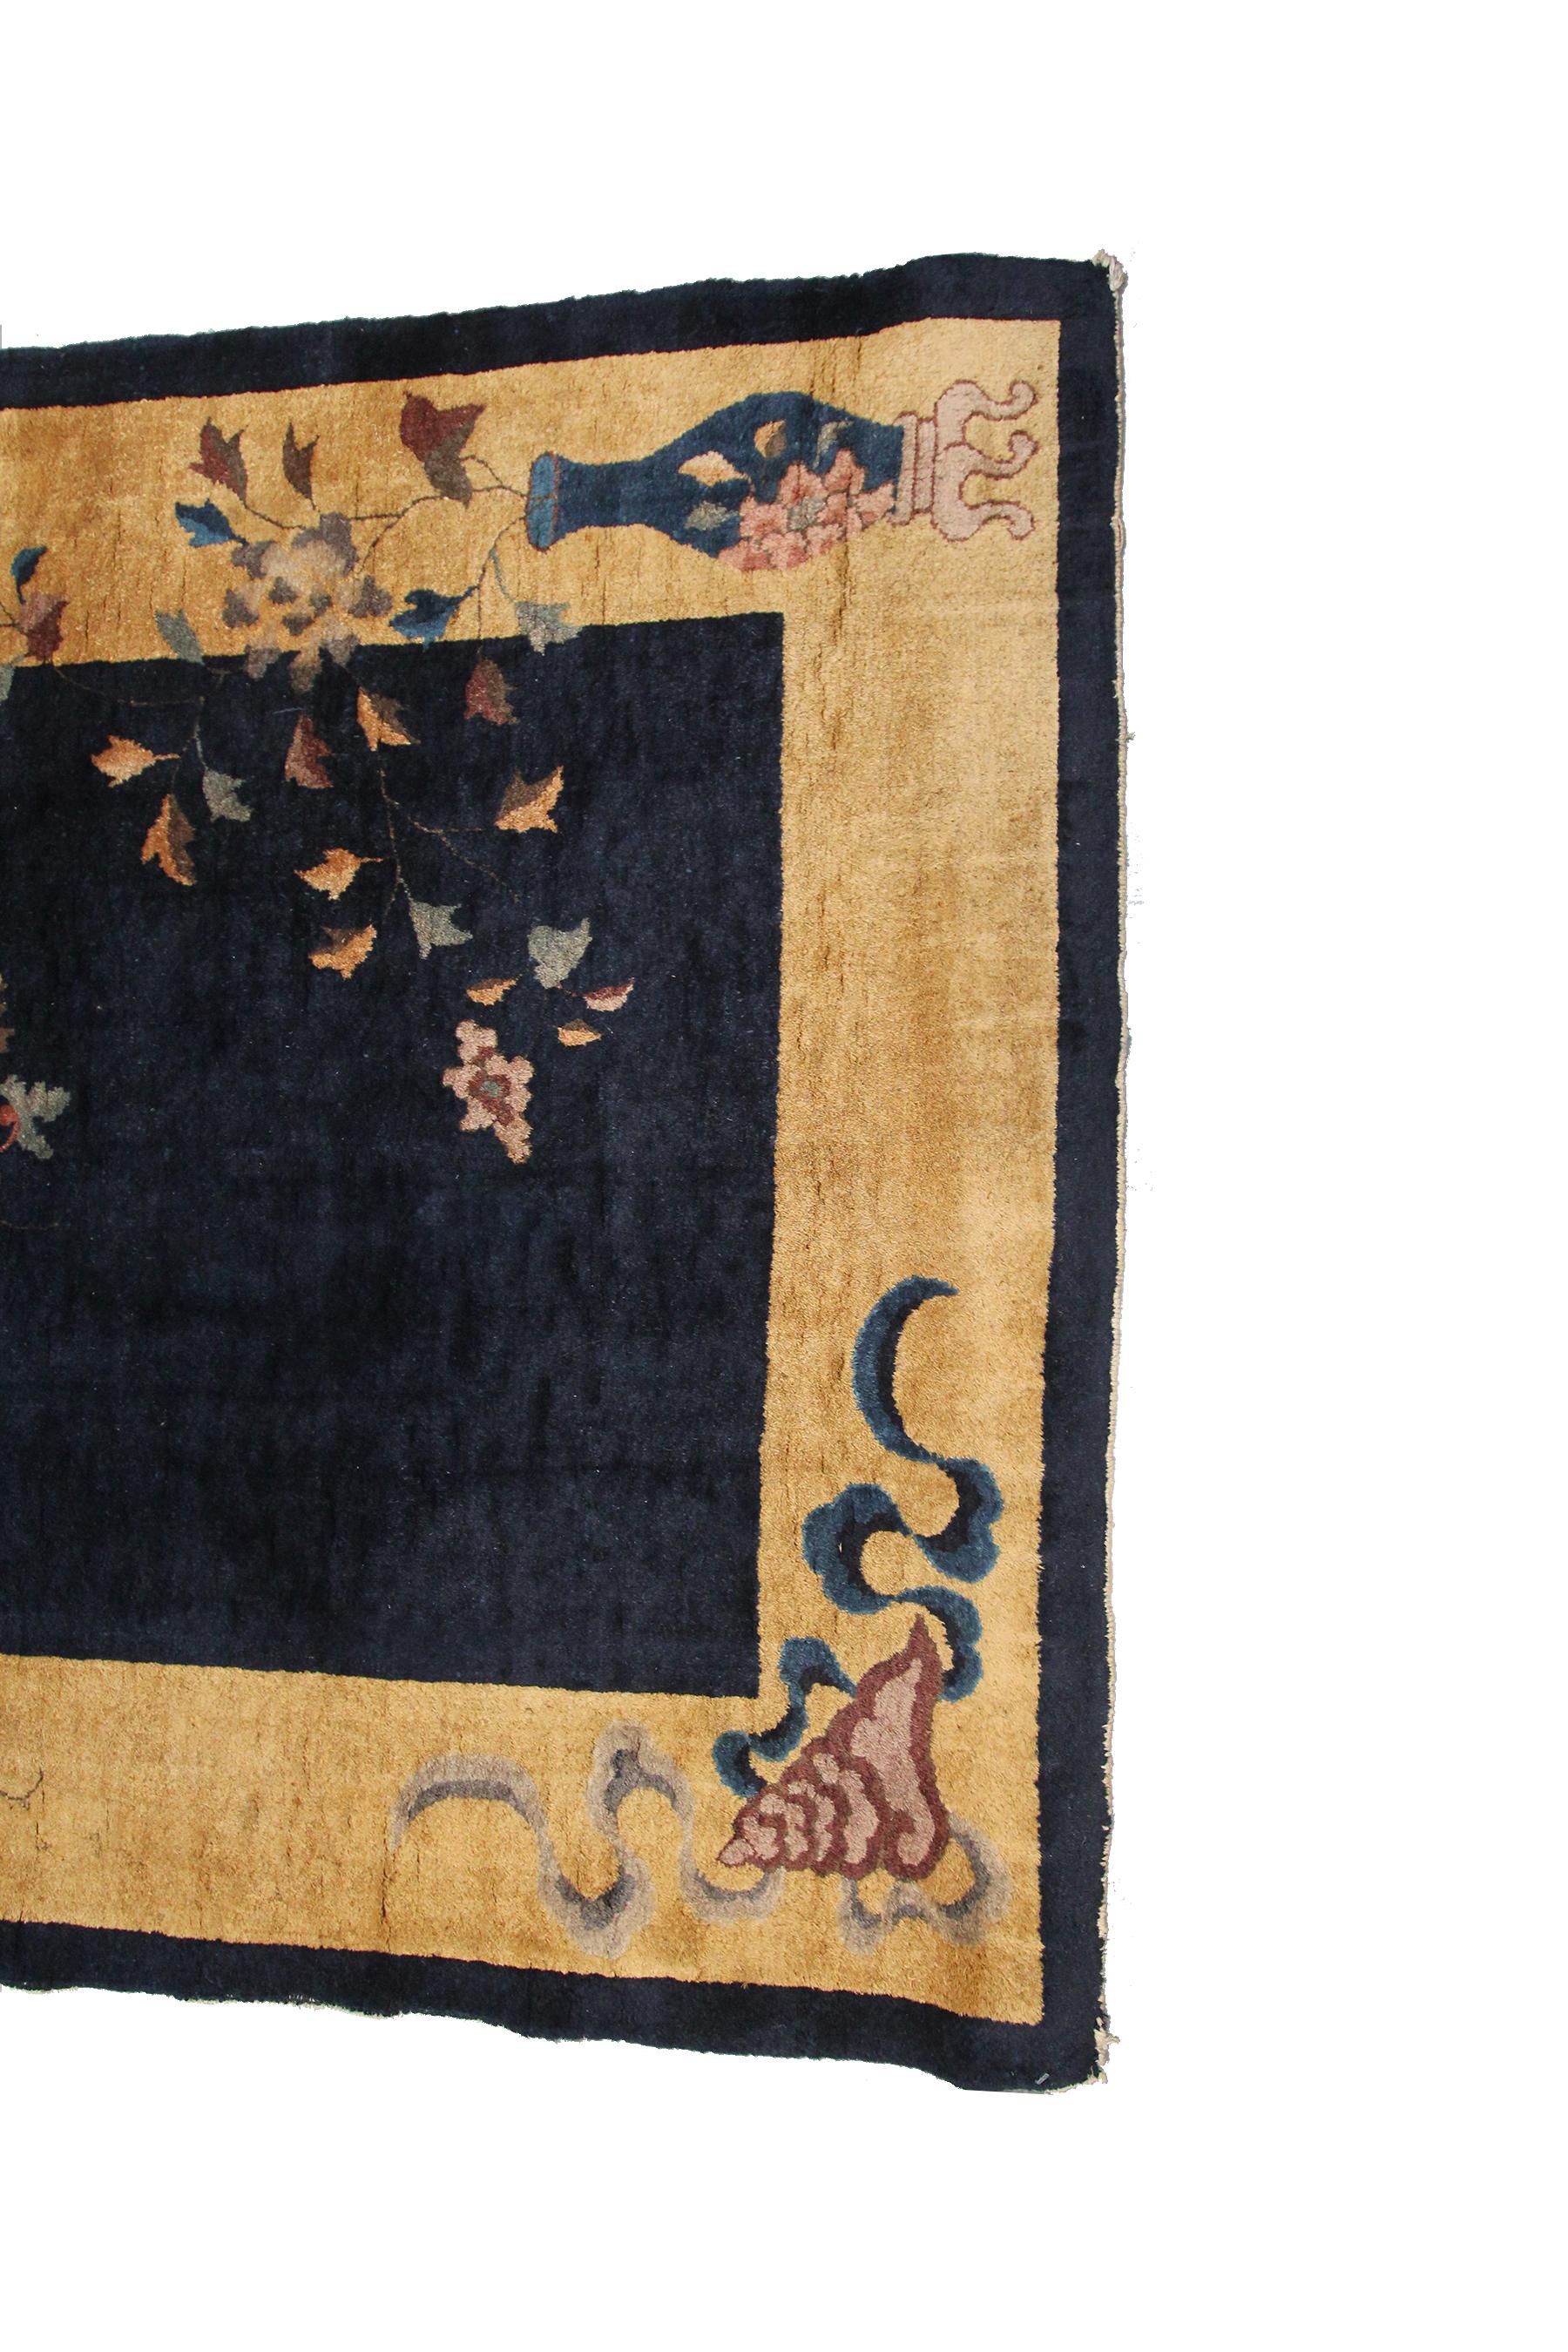 Wool Antique Art Deco Rug Antique Chinese Rug Walter Nichols Blue 4x7 122x203cm For Sale